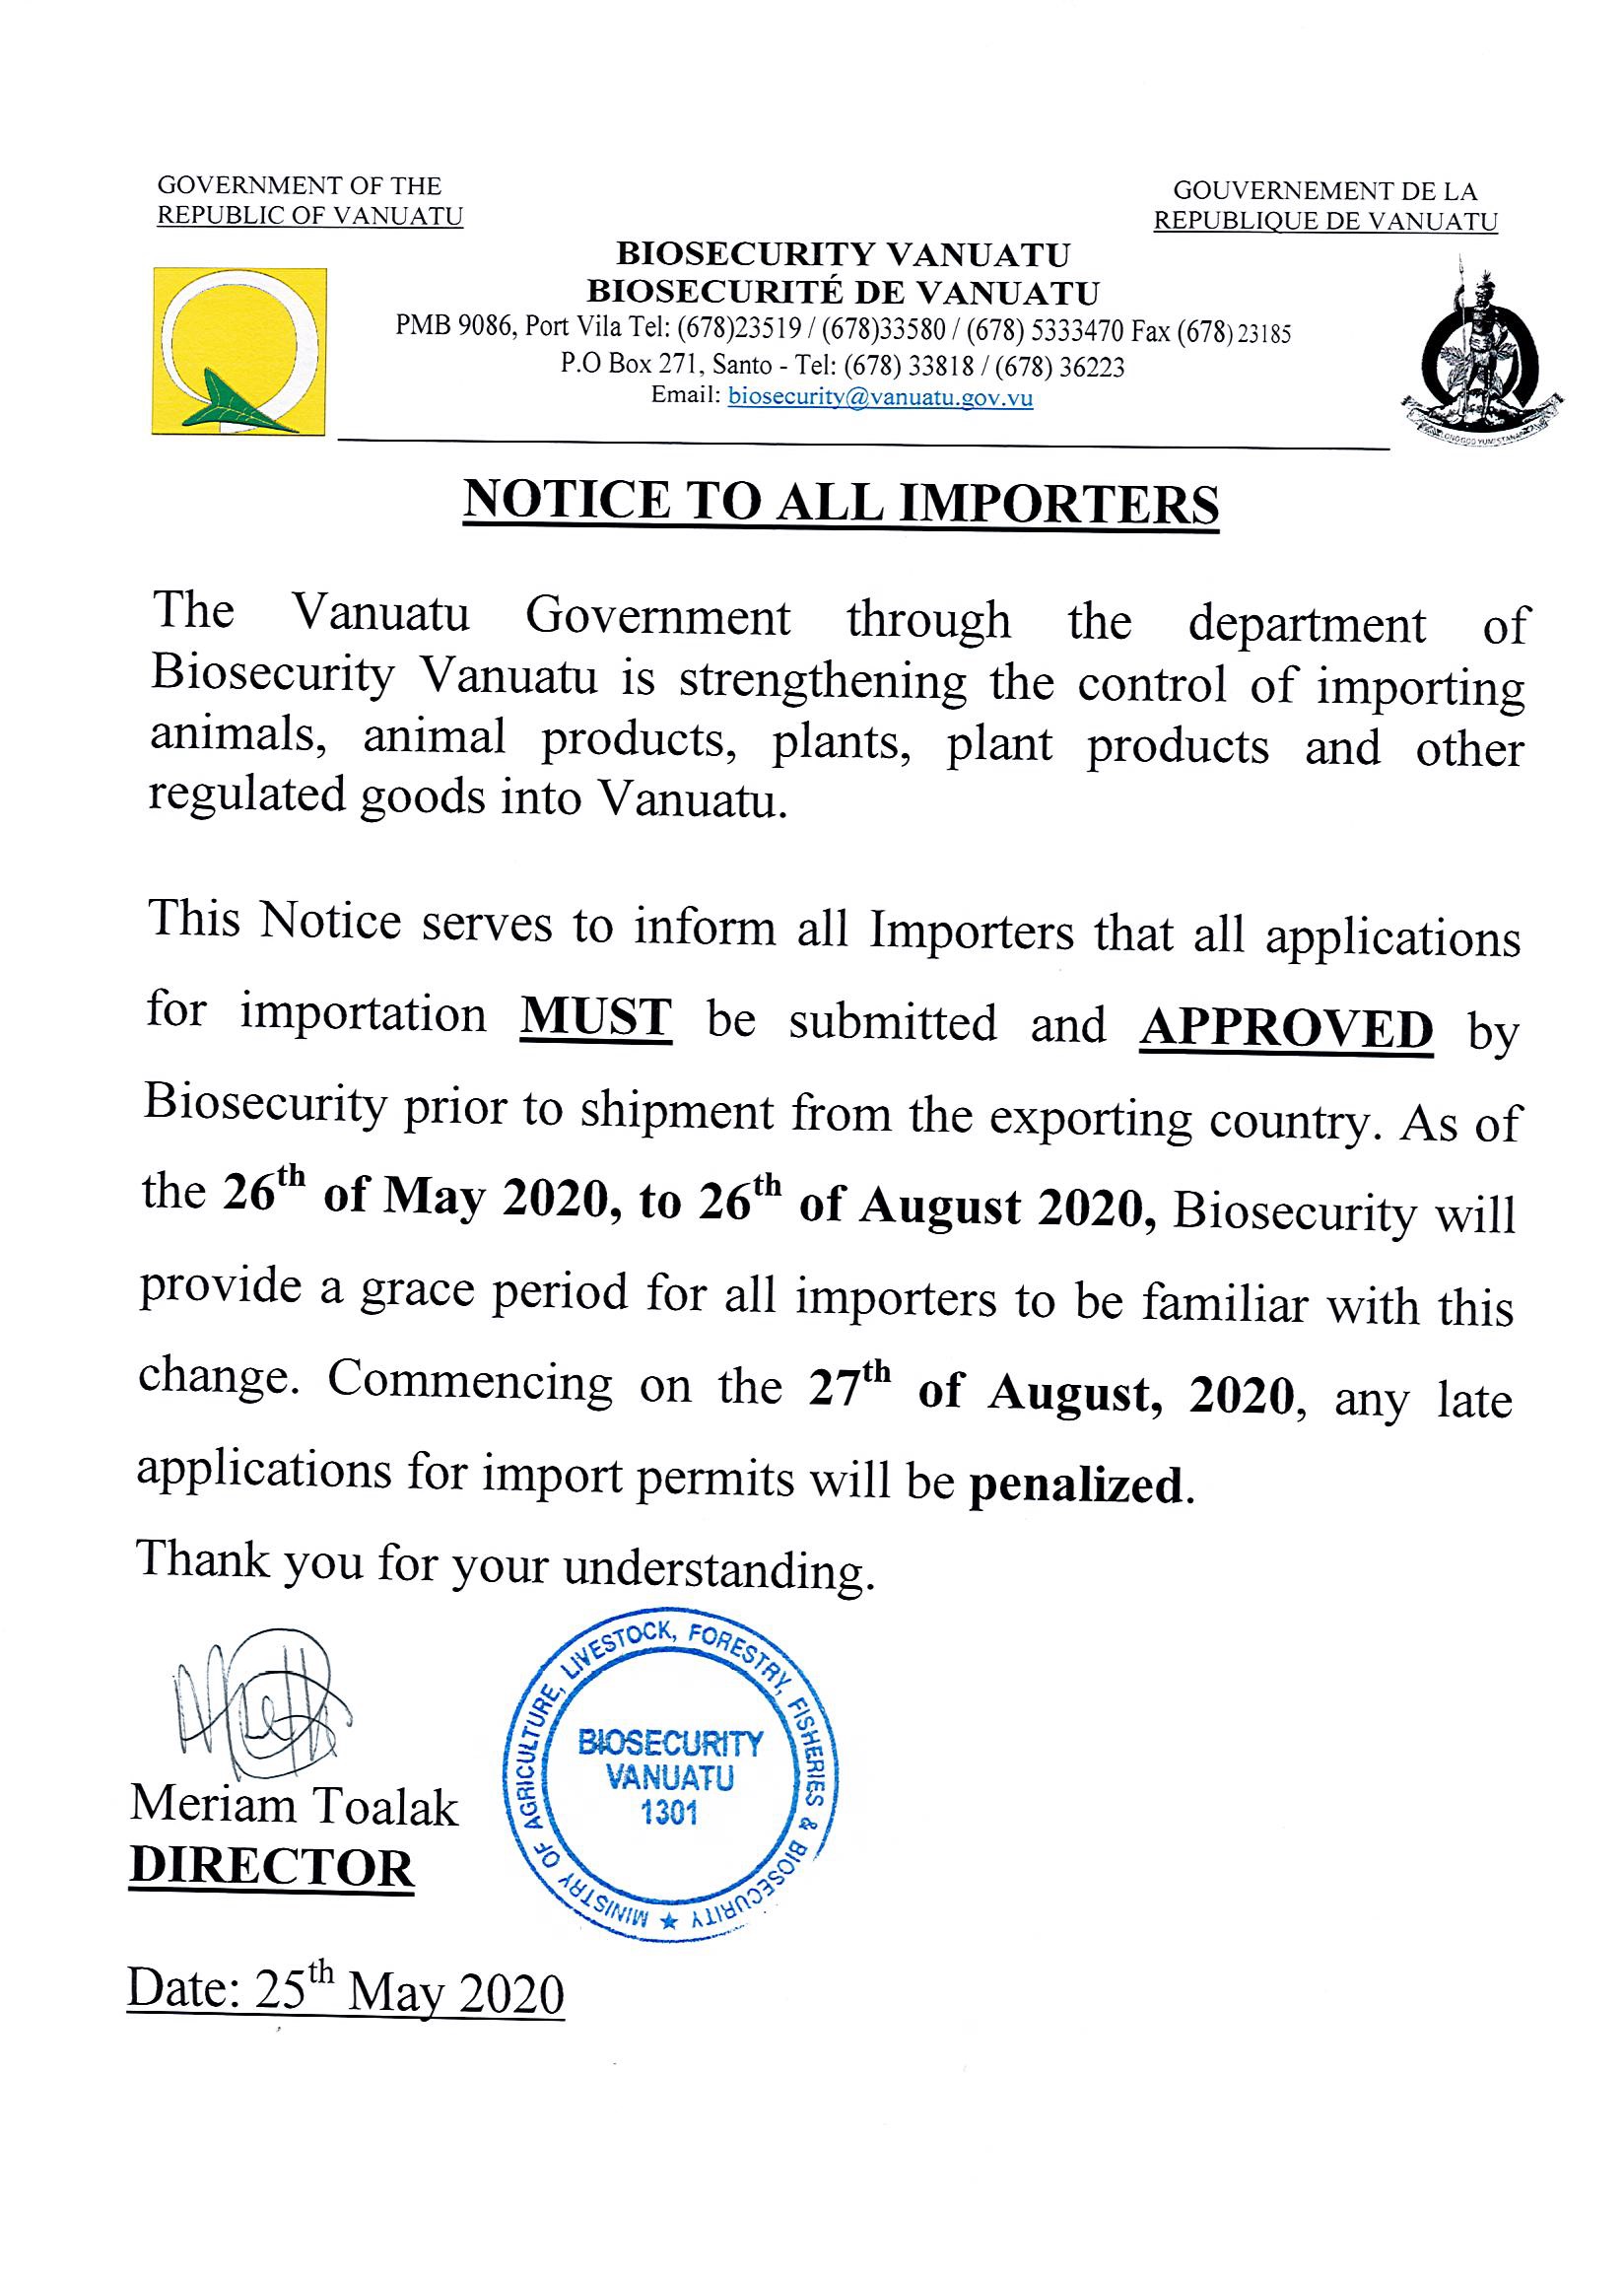 Notice to all Importers and Exporters in Luganville, Santo.